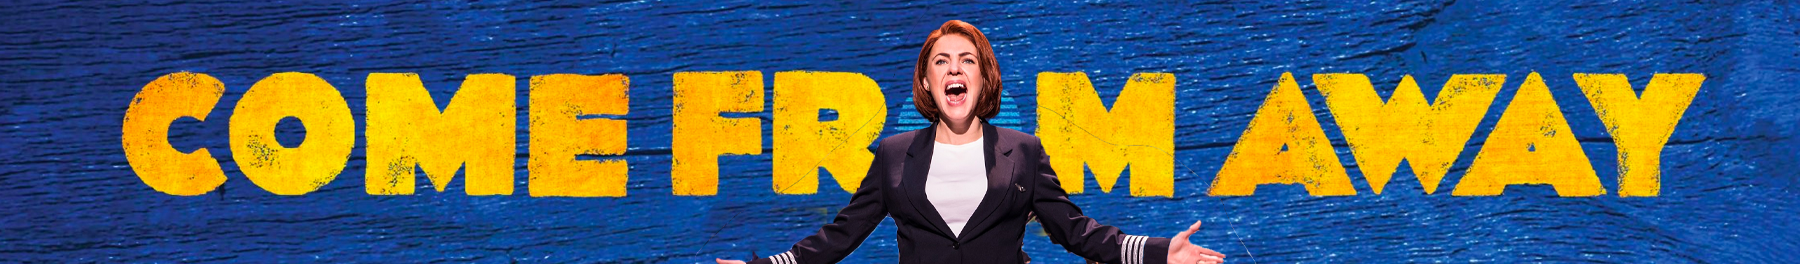 Come From Away Broadway Show